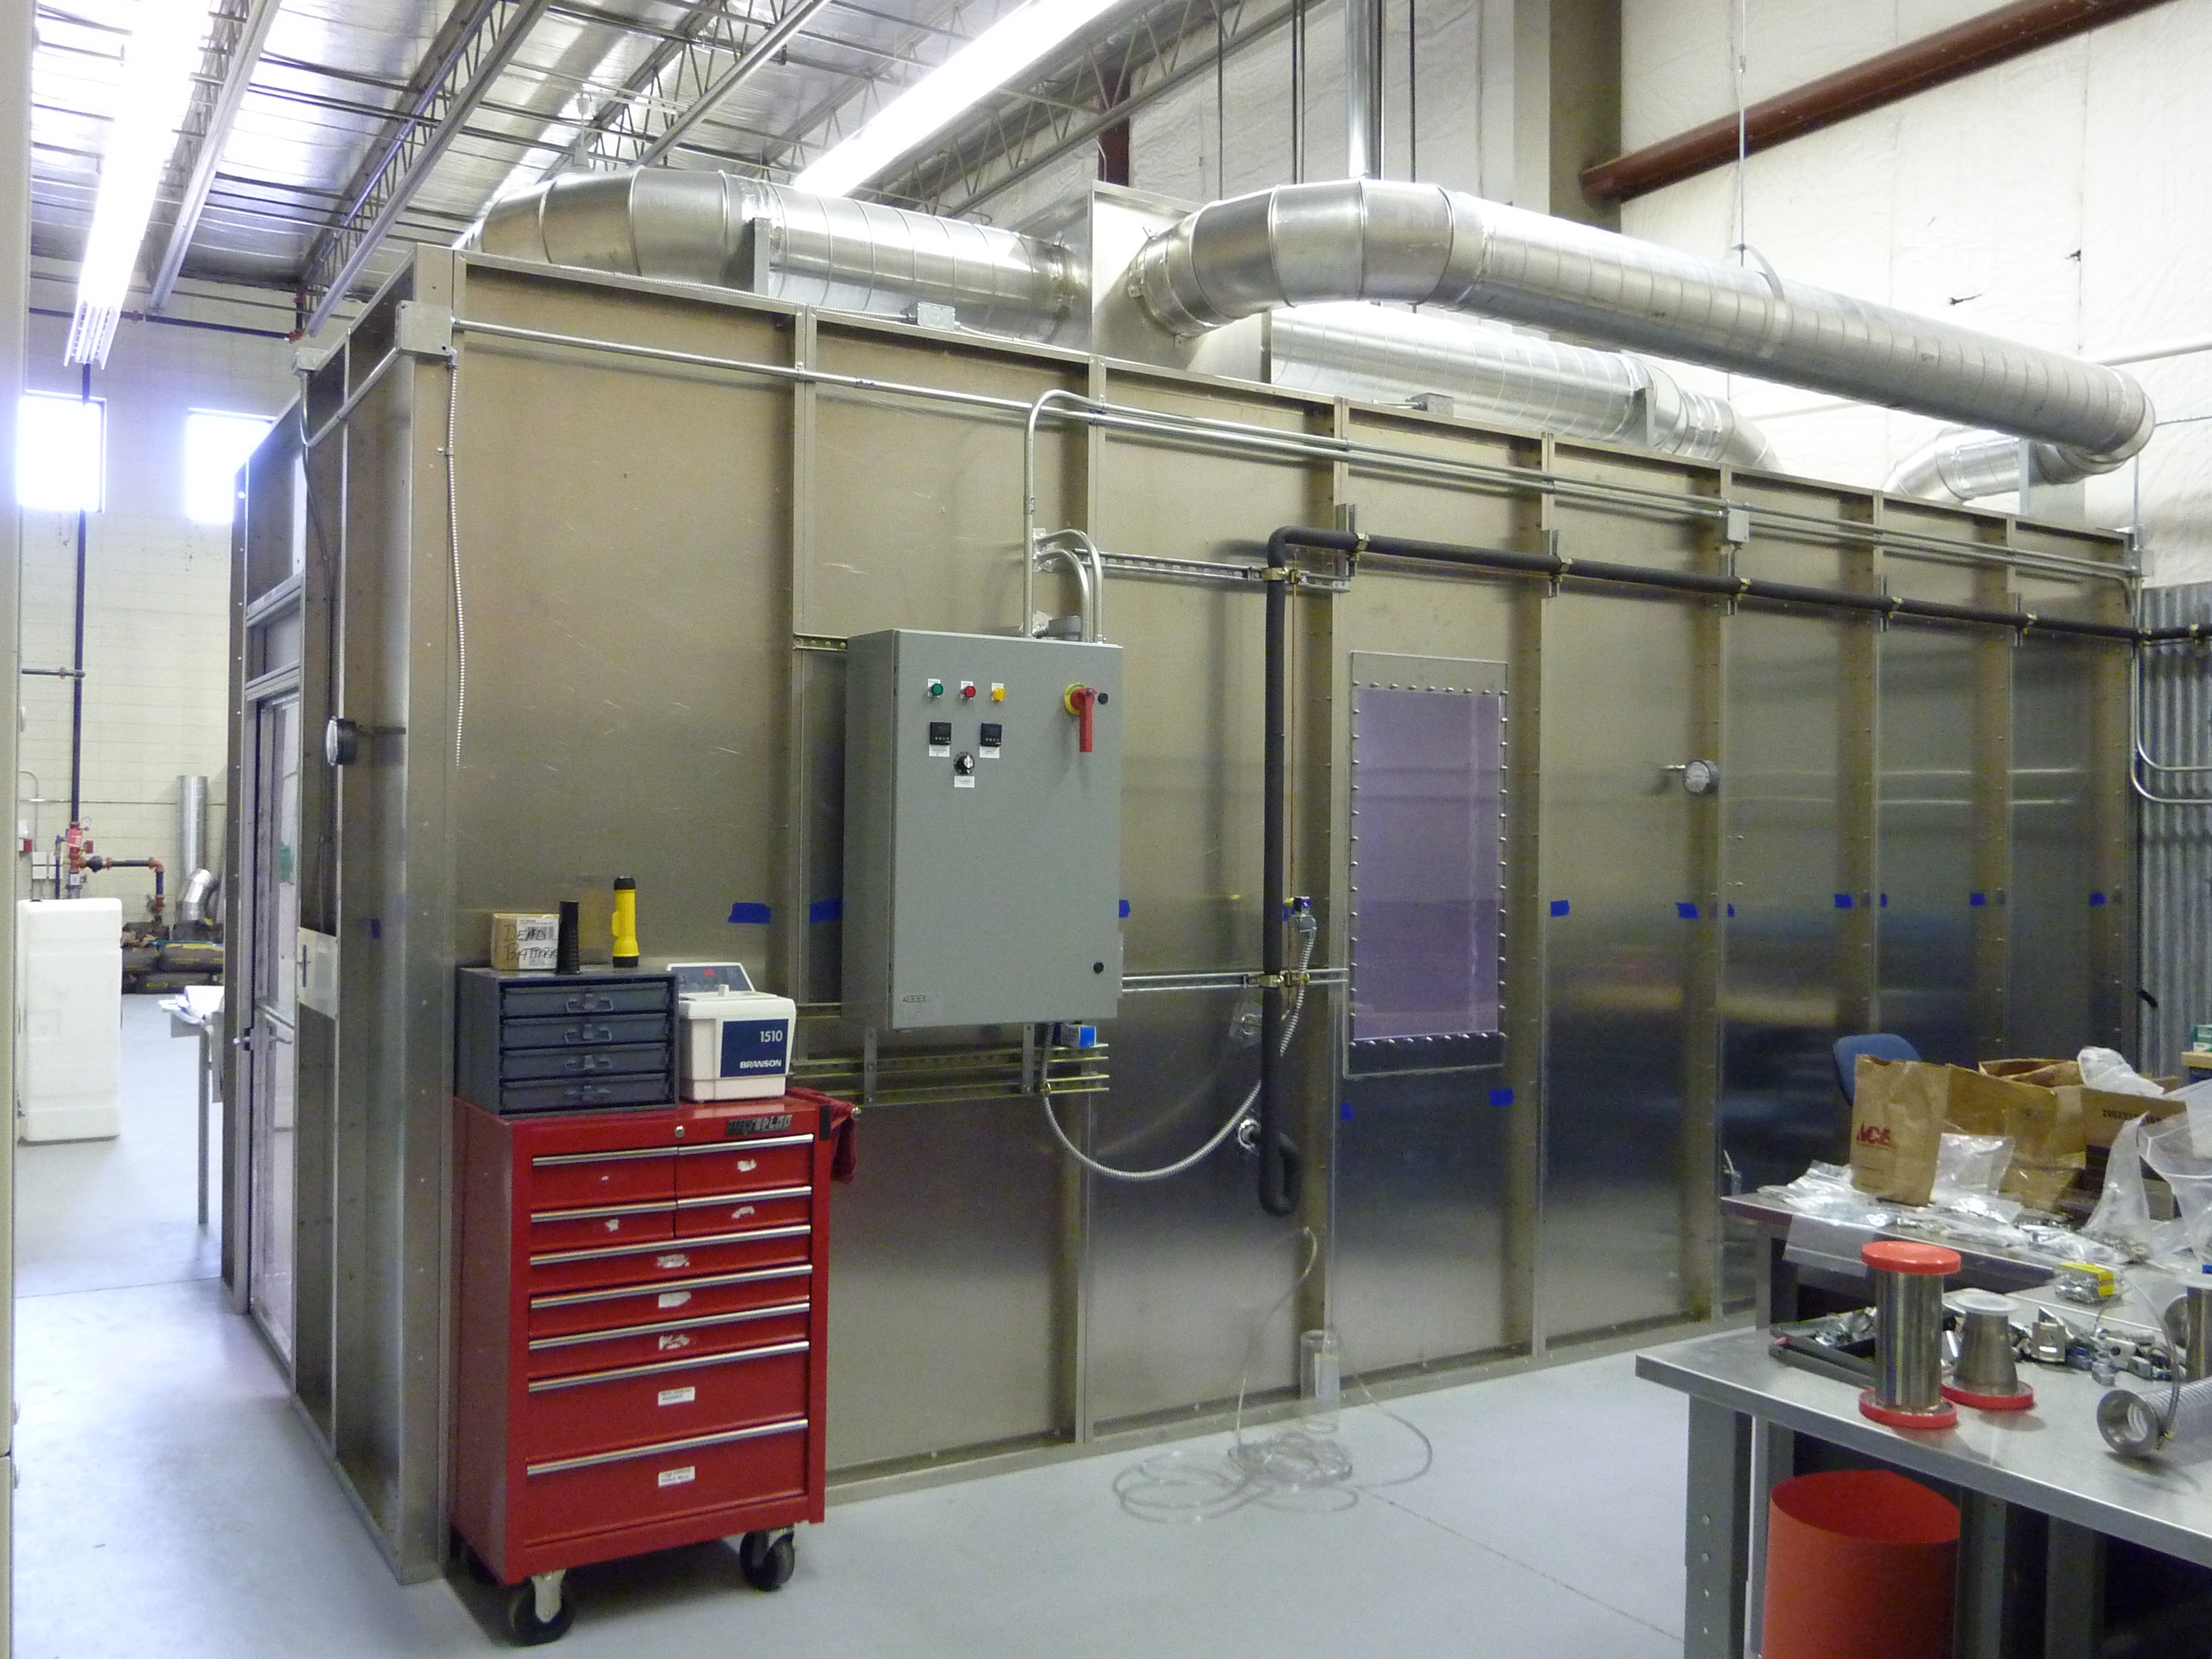 When complete, this new physics lab space located on the South Dakota School of Mines & Technology campus should have the lowest radon concentration of any cleanroom on the continent.